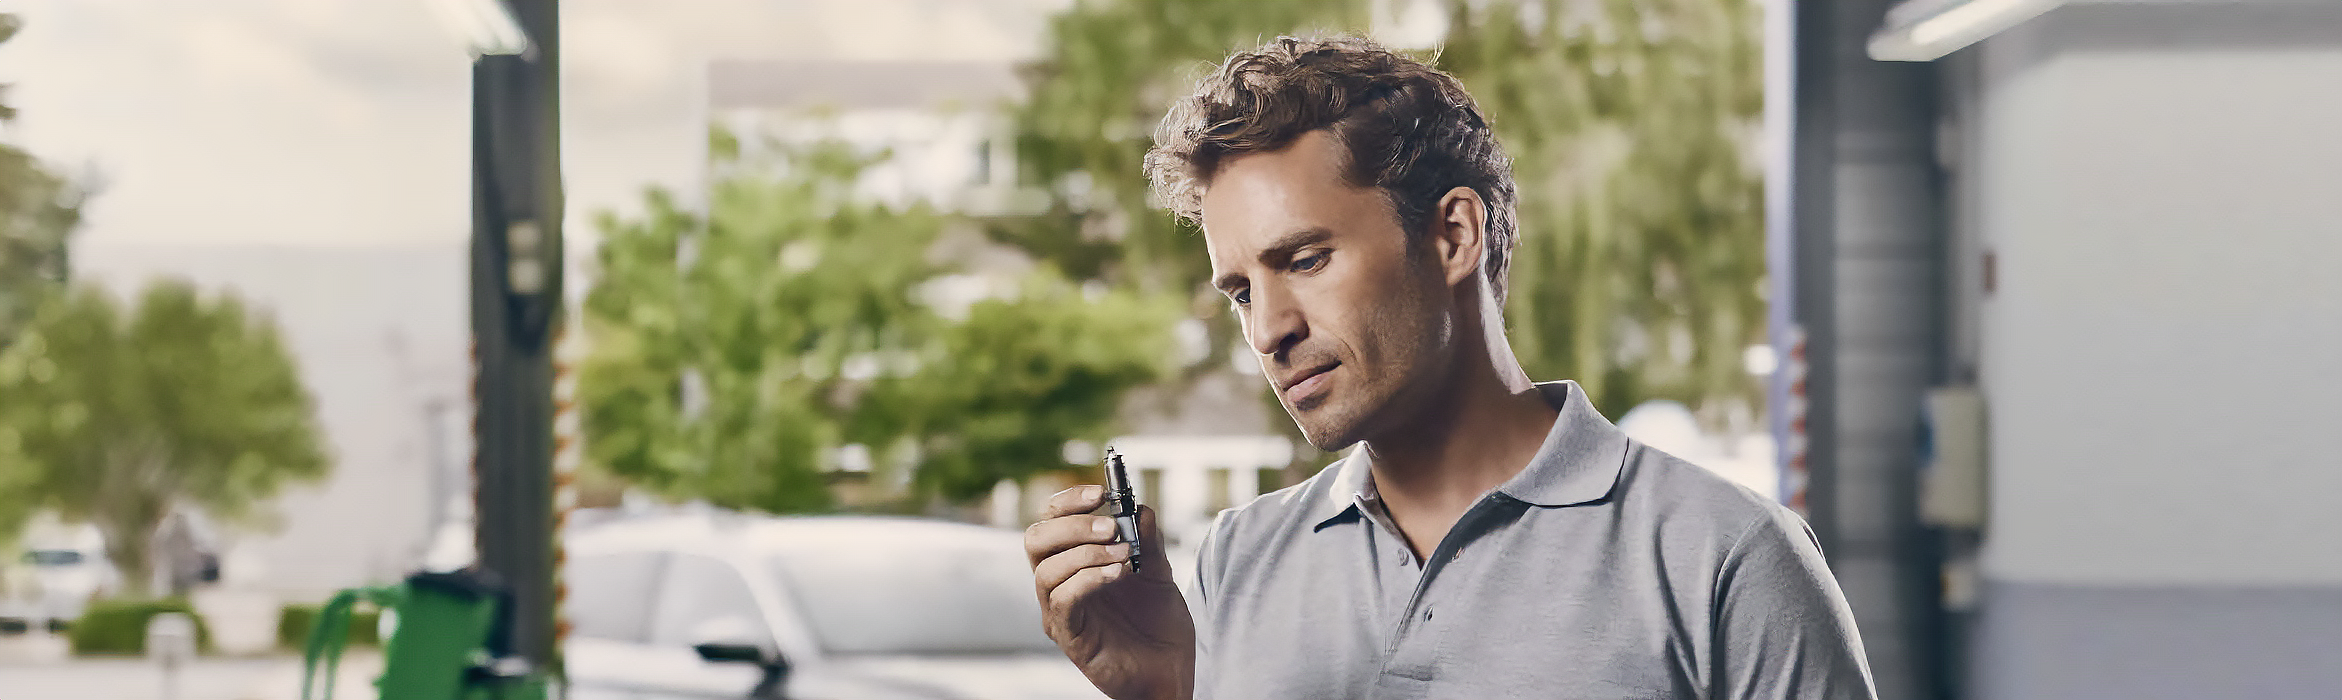 Bosch Spark Plugs – Driven by Milliseconds